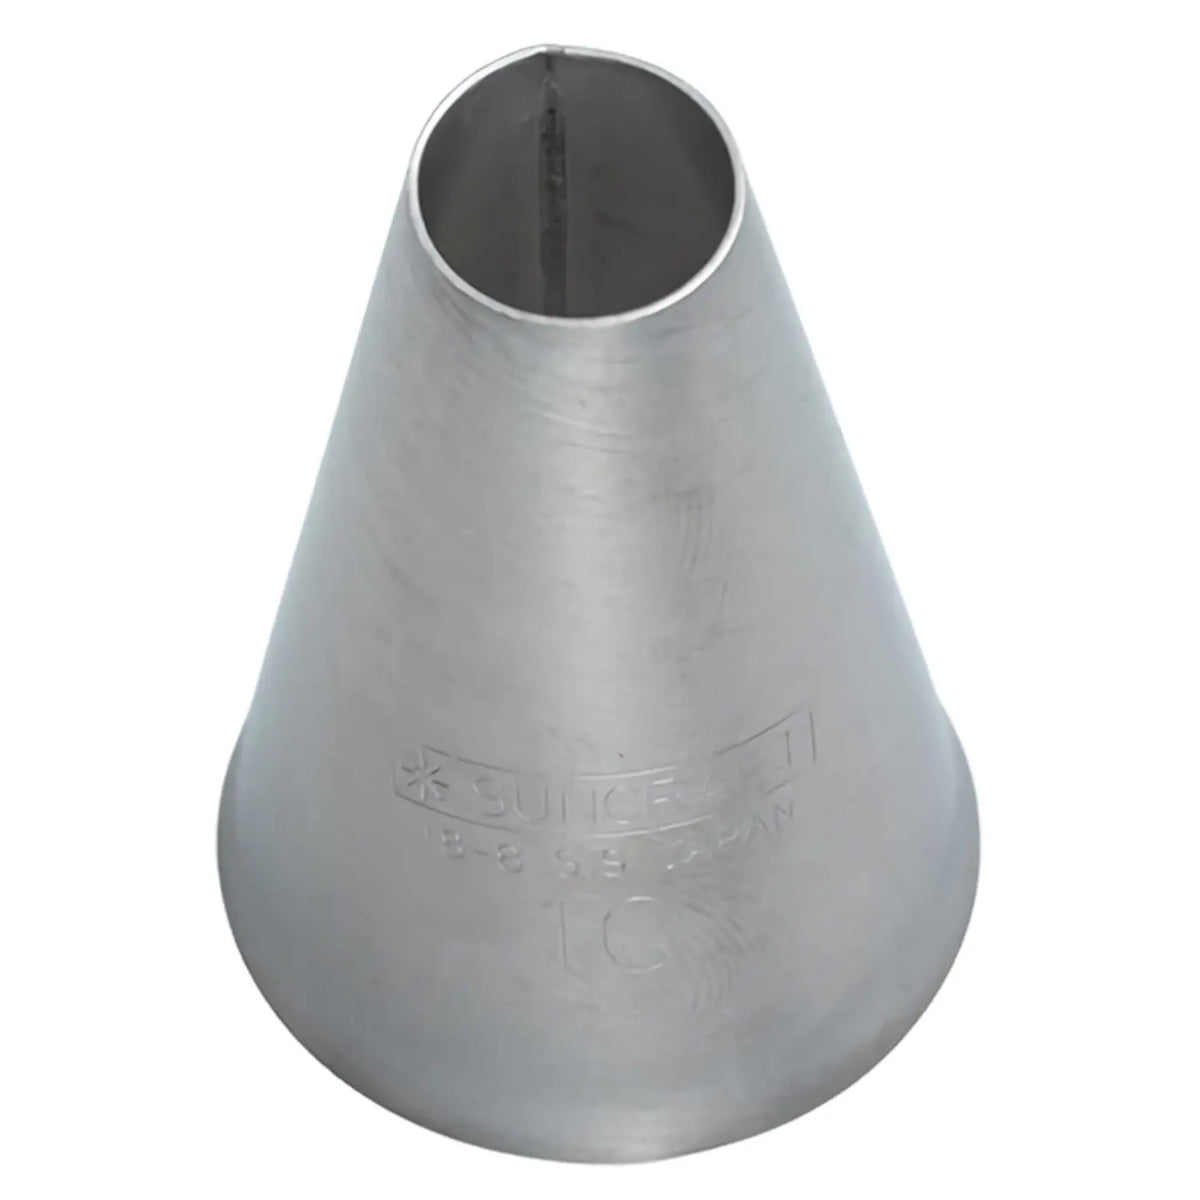 SUNCRAFT Patissiere Stainless Steel Round Piping Tip